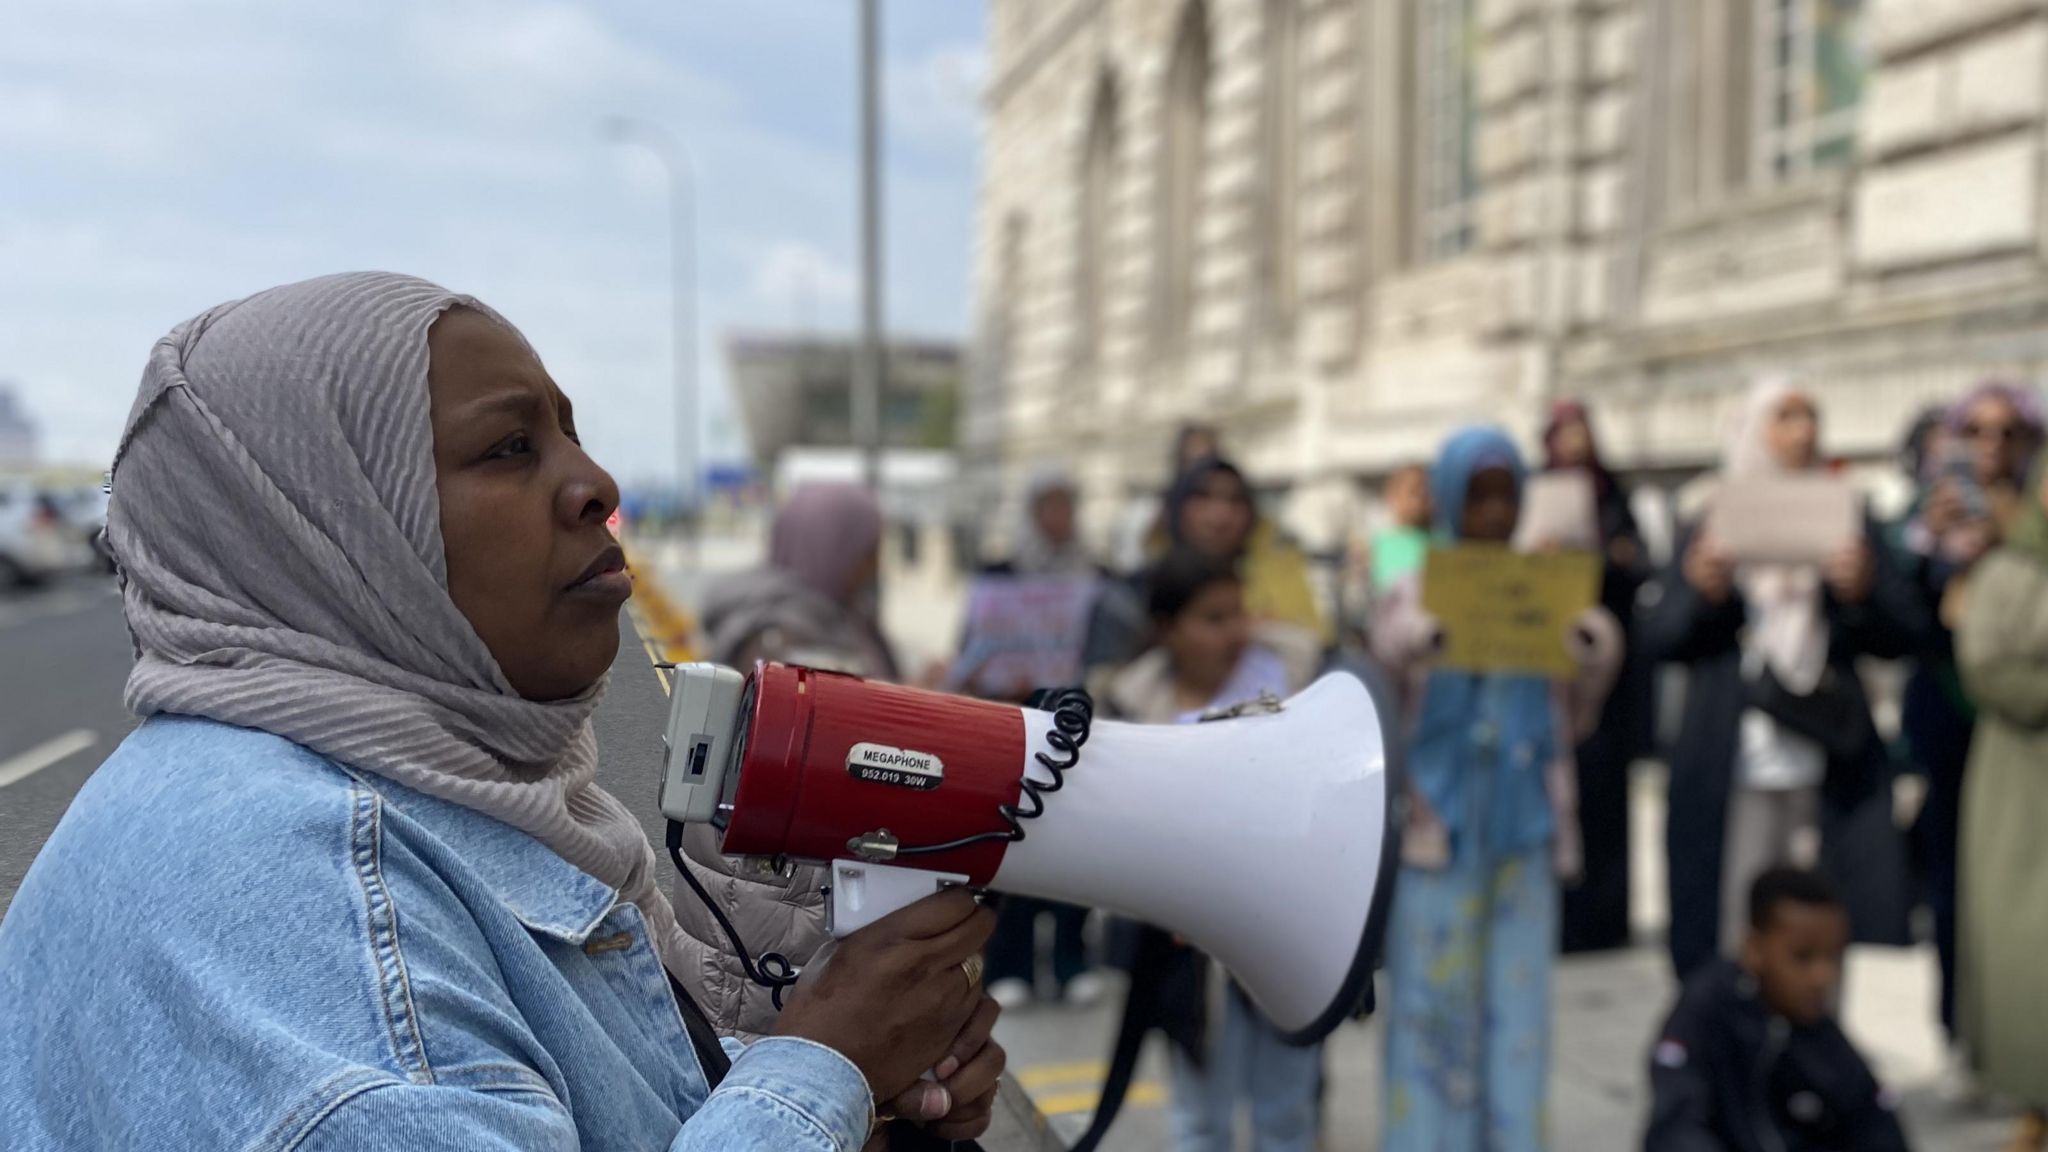 Amina Ismail addressing the crowd with a megaphone